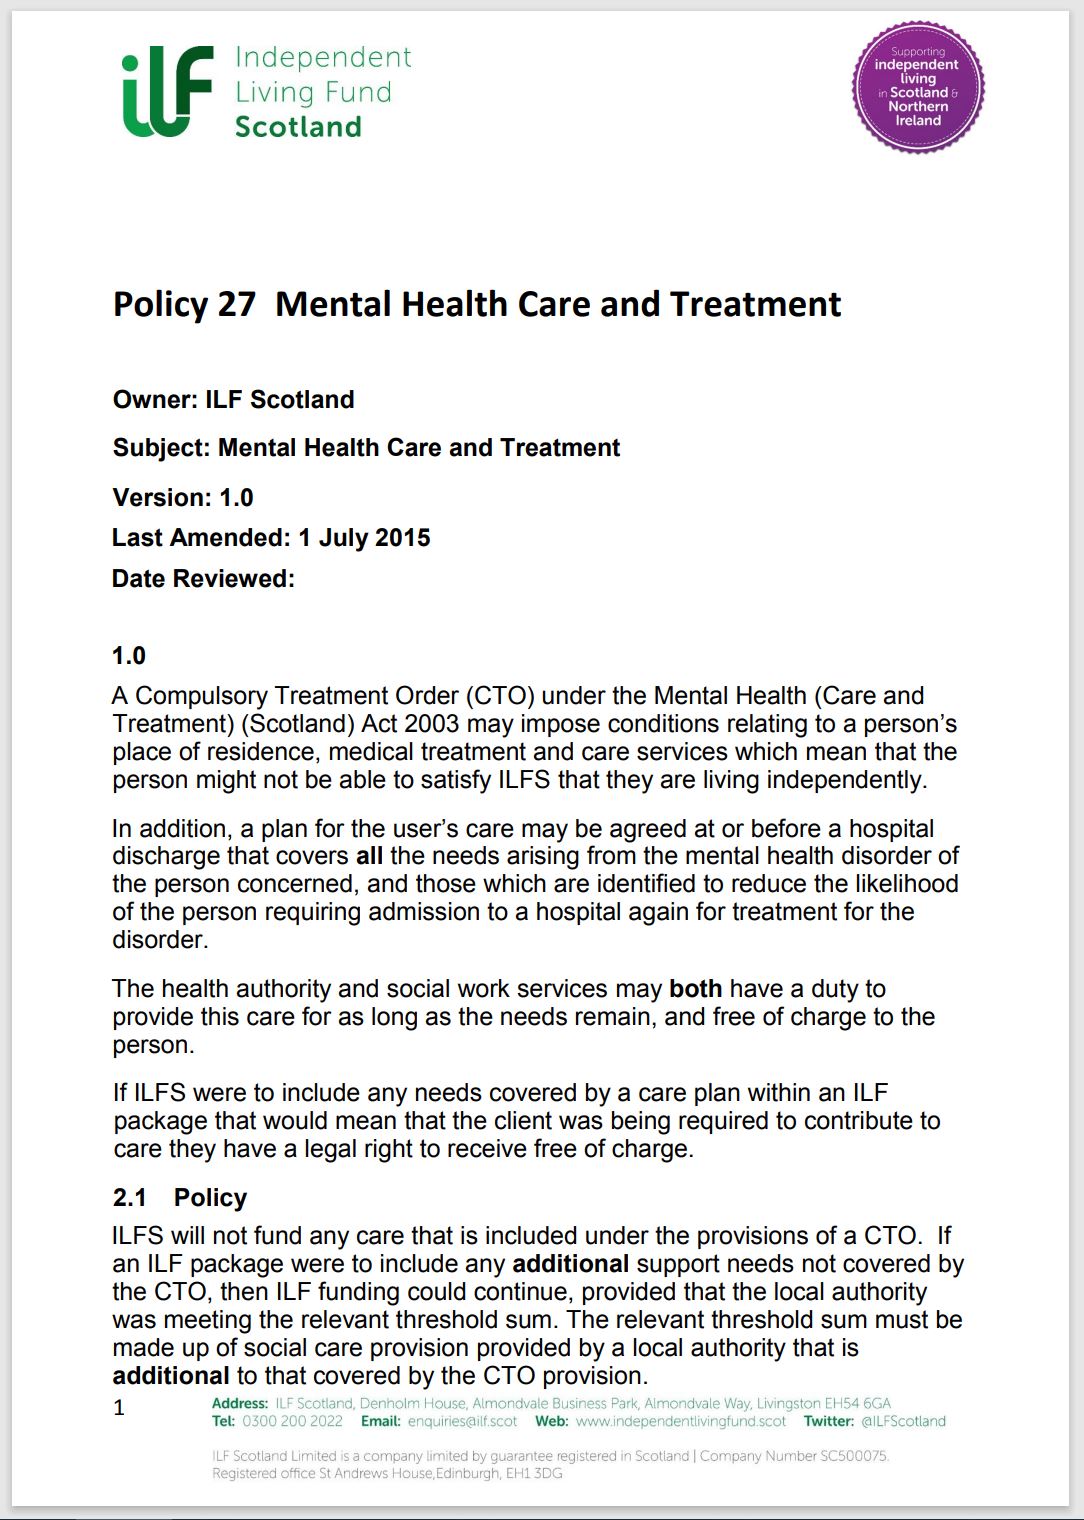 Cover page for policy 27